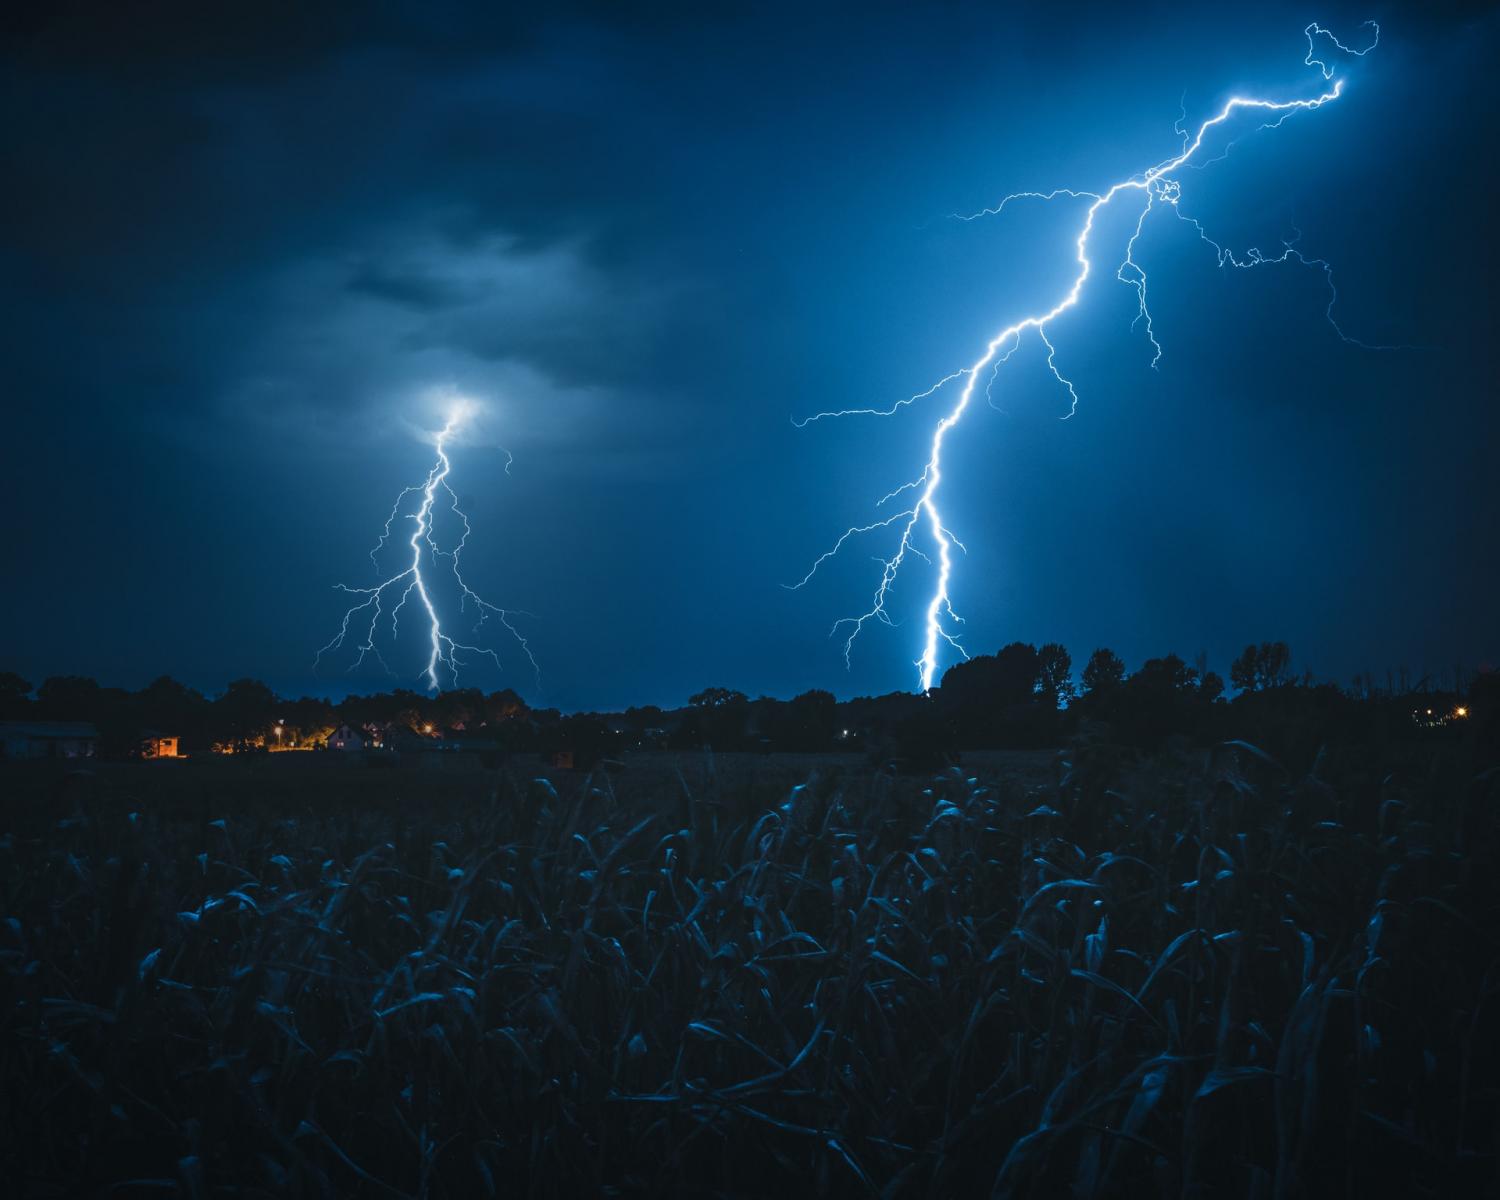 Thunderstorm Safety: How to avoid being struck by lightning